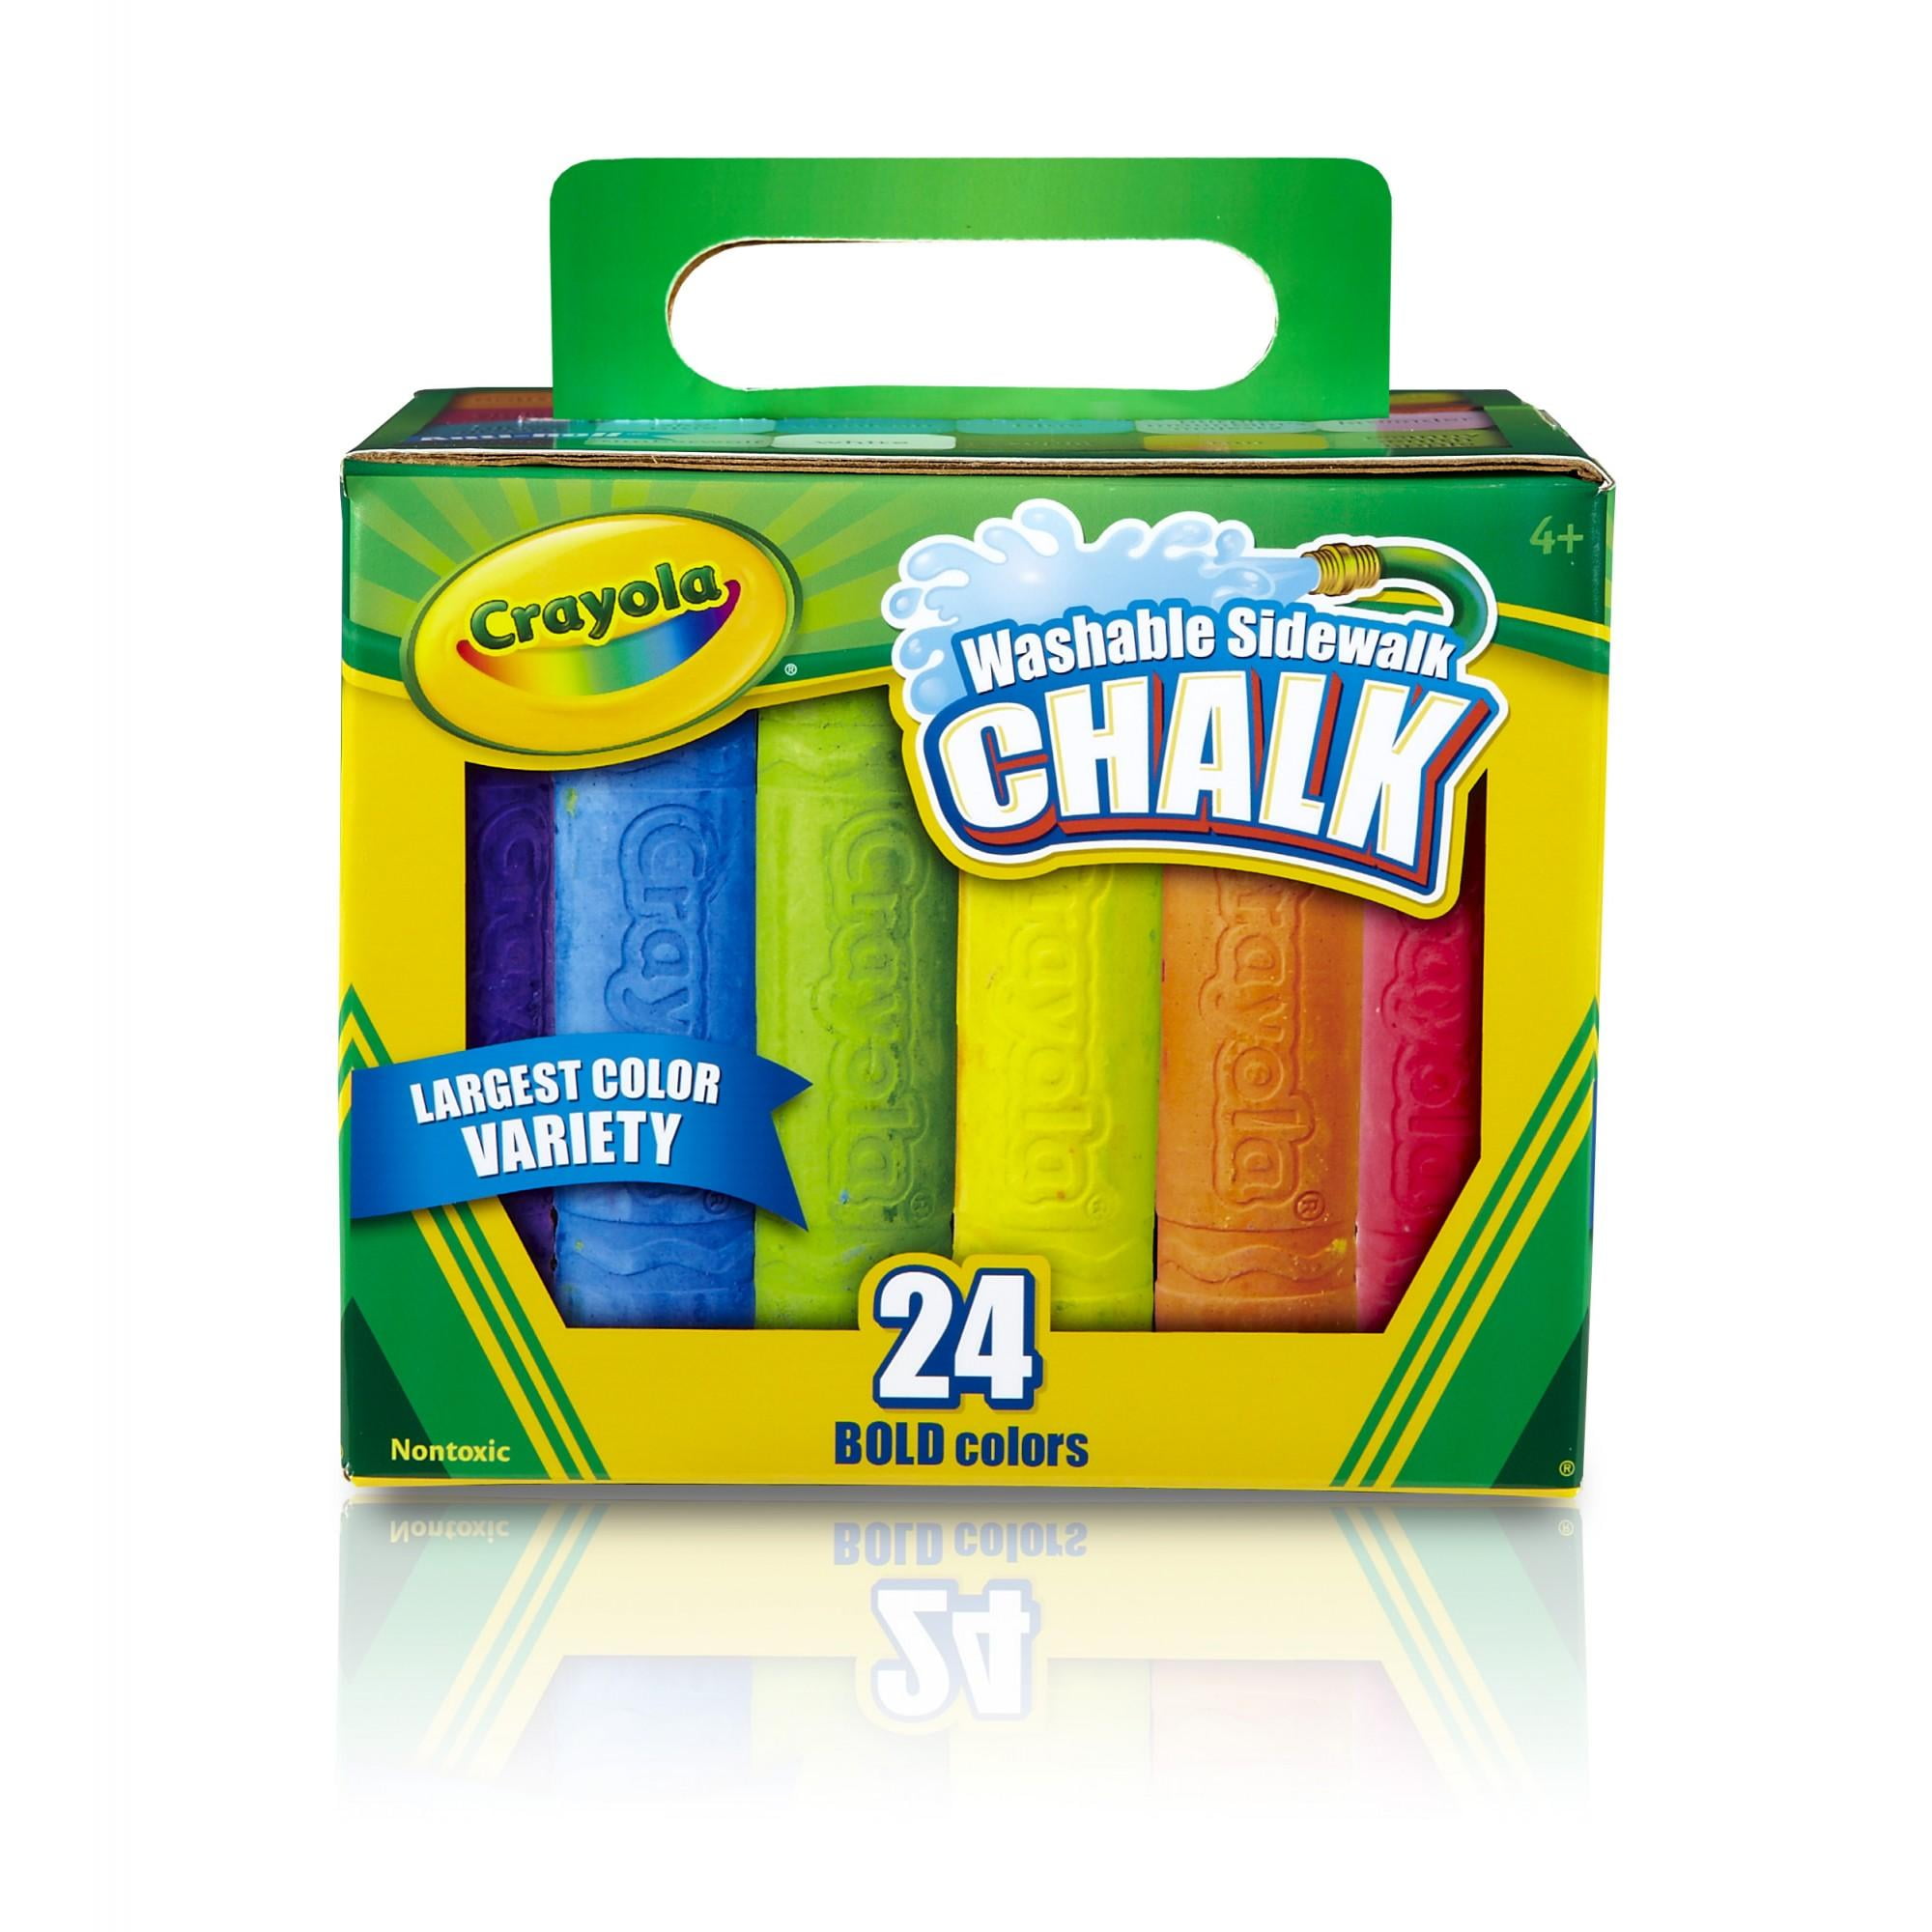 Crayola Paint Colors Chalk Assorted 12 Sticks Per Box Toys Games New 